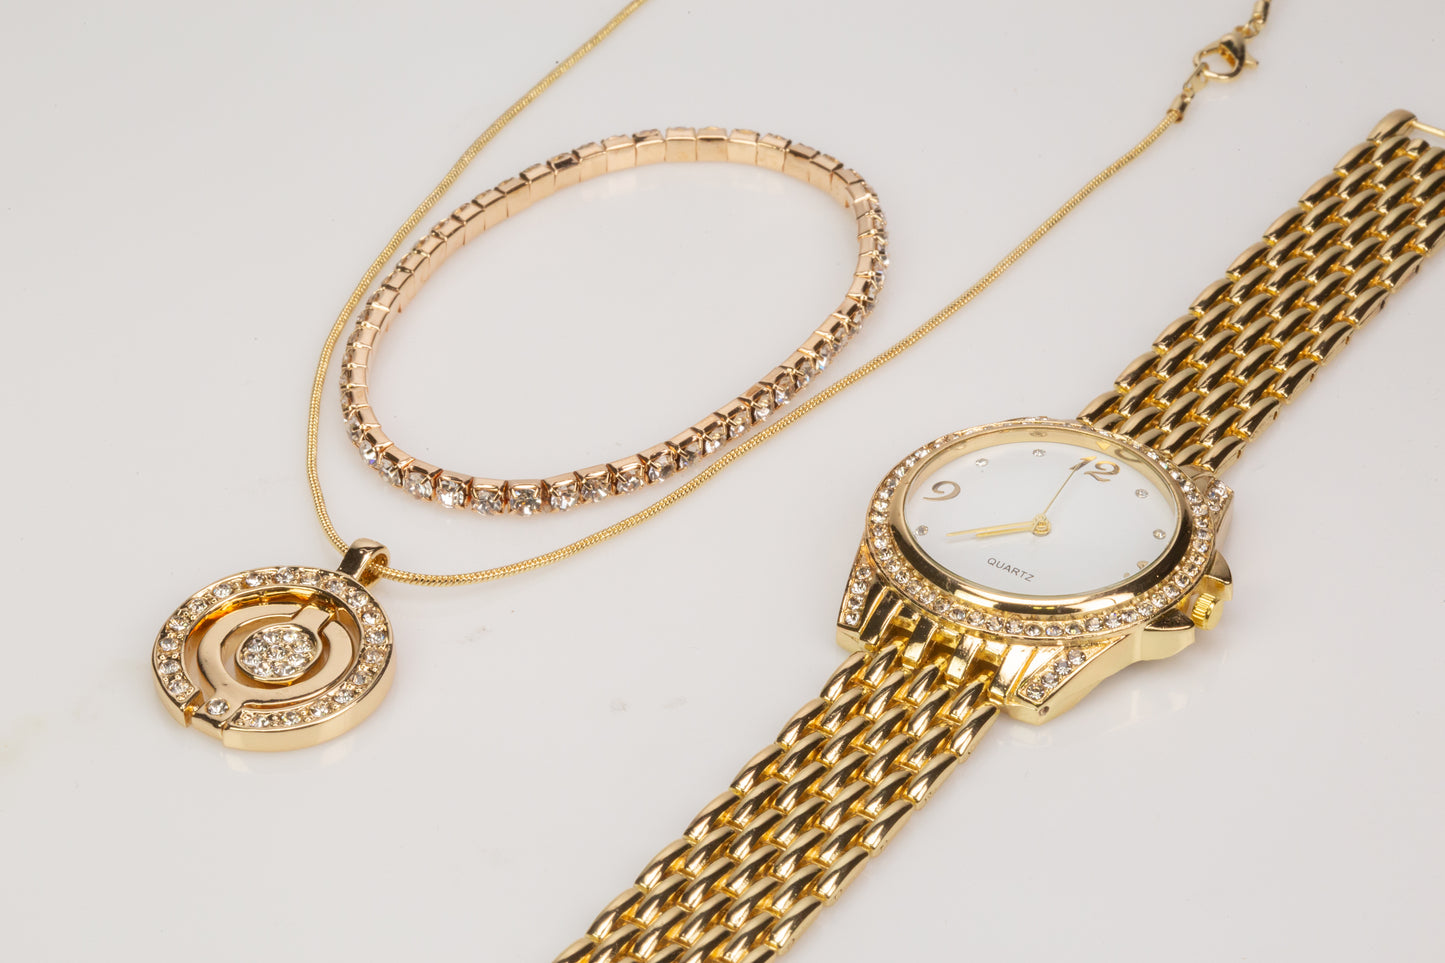 3 pieces Gold Plated Alloy Set of Quartz Watch (19 cm), stretchable Bracelet (21 cm) and pendant necklace (46 cm) with White Emporia Crystals, white dial